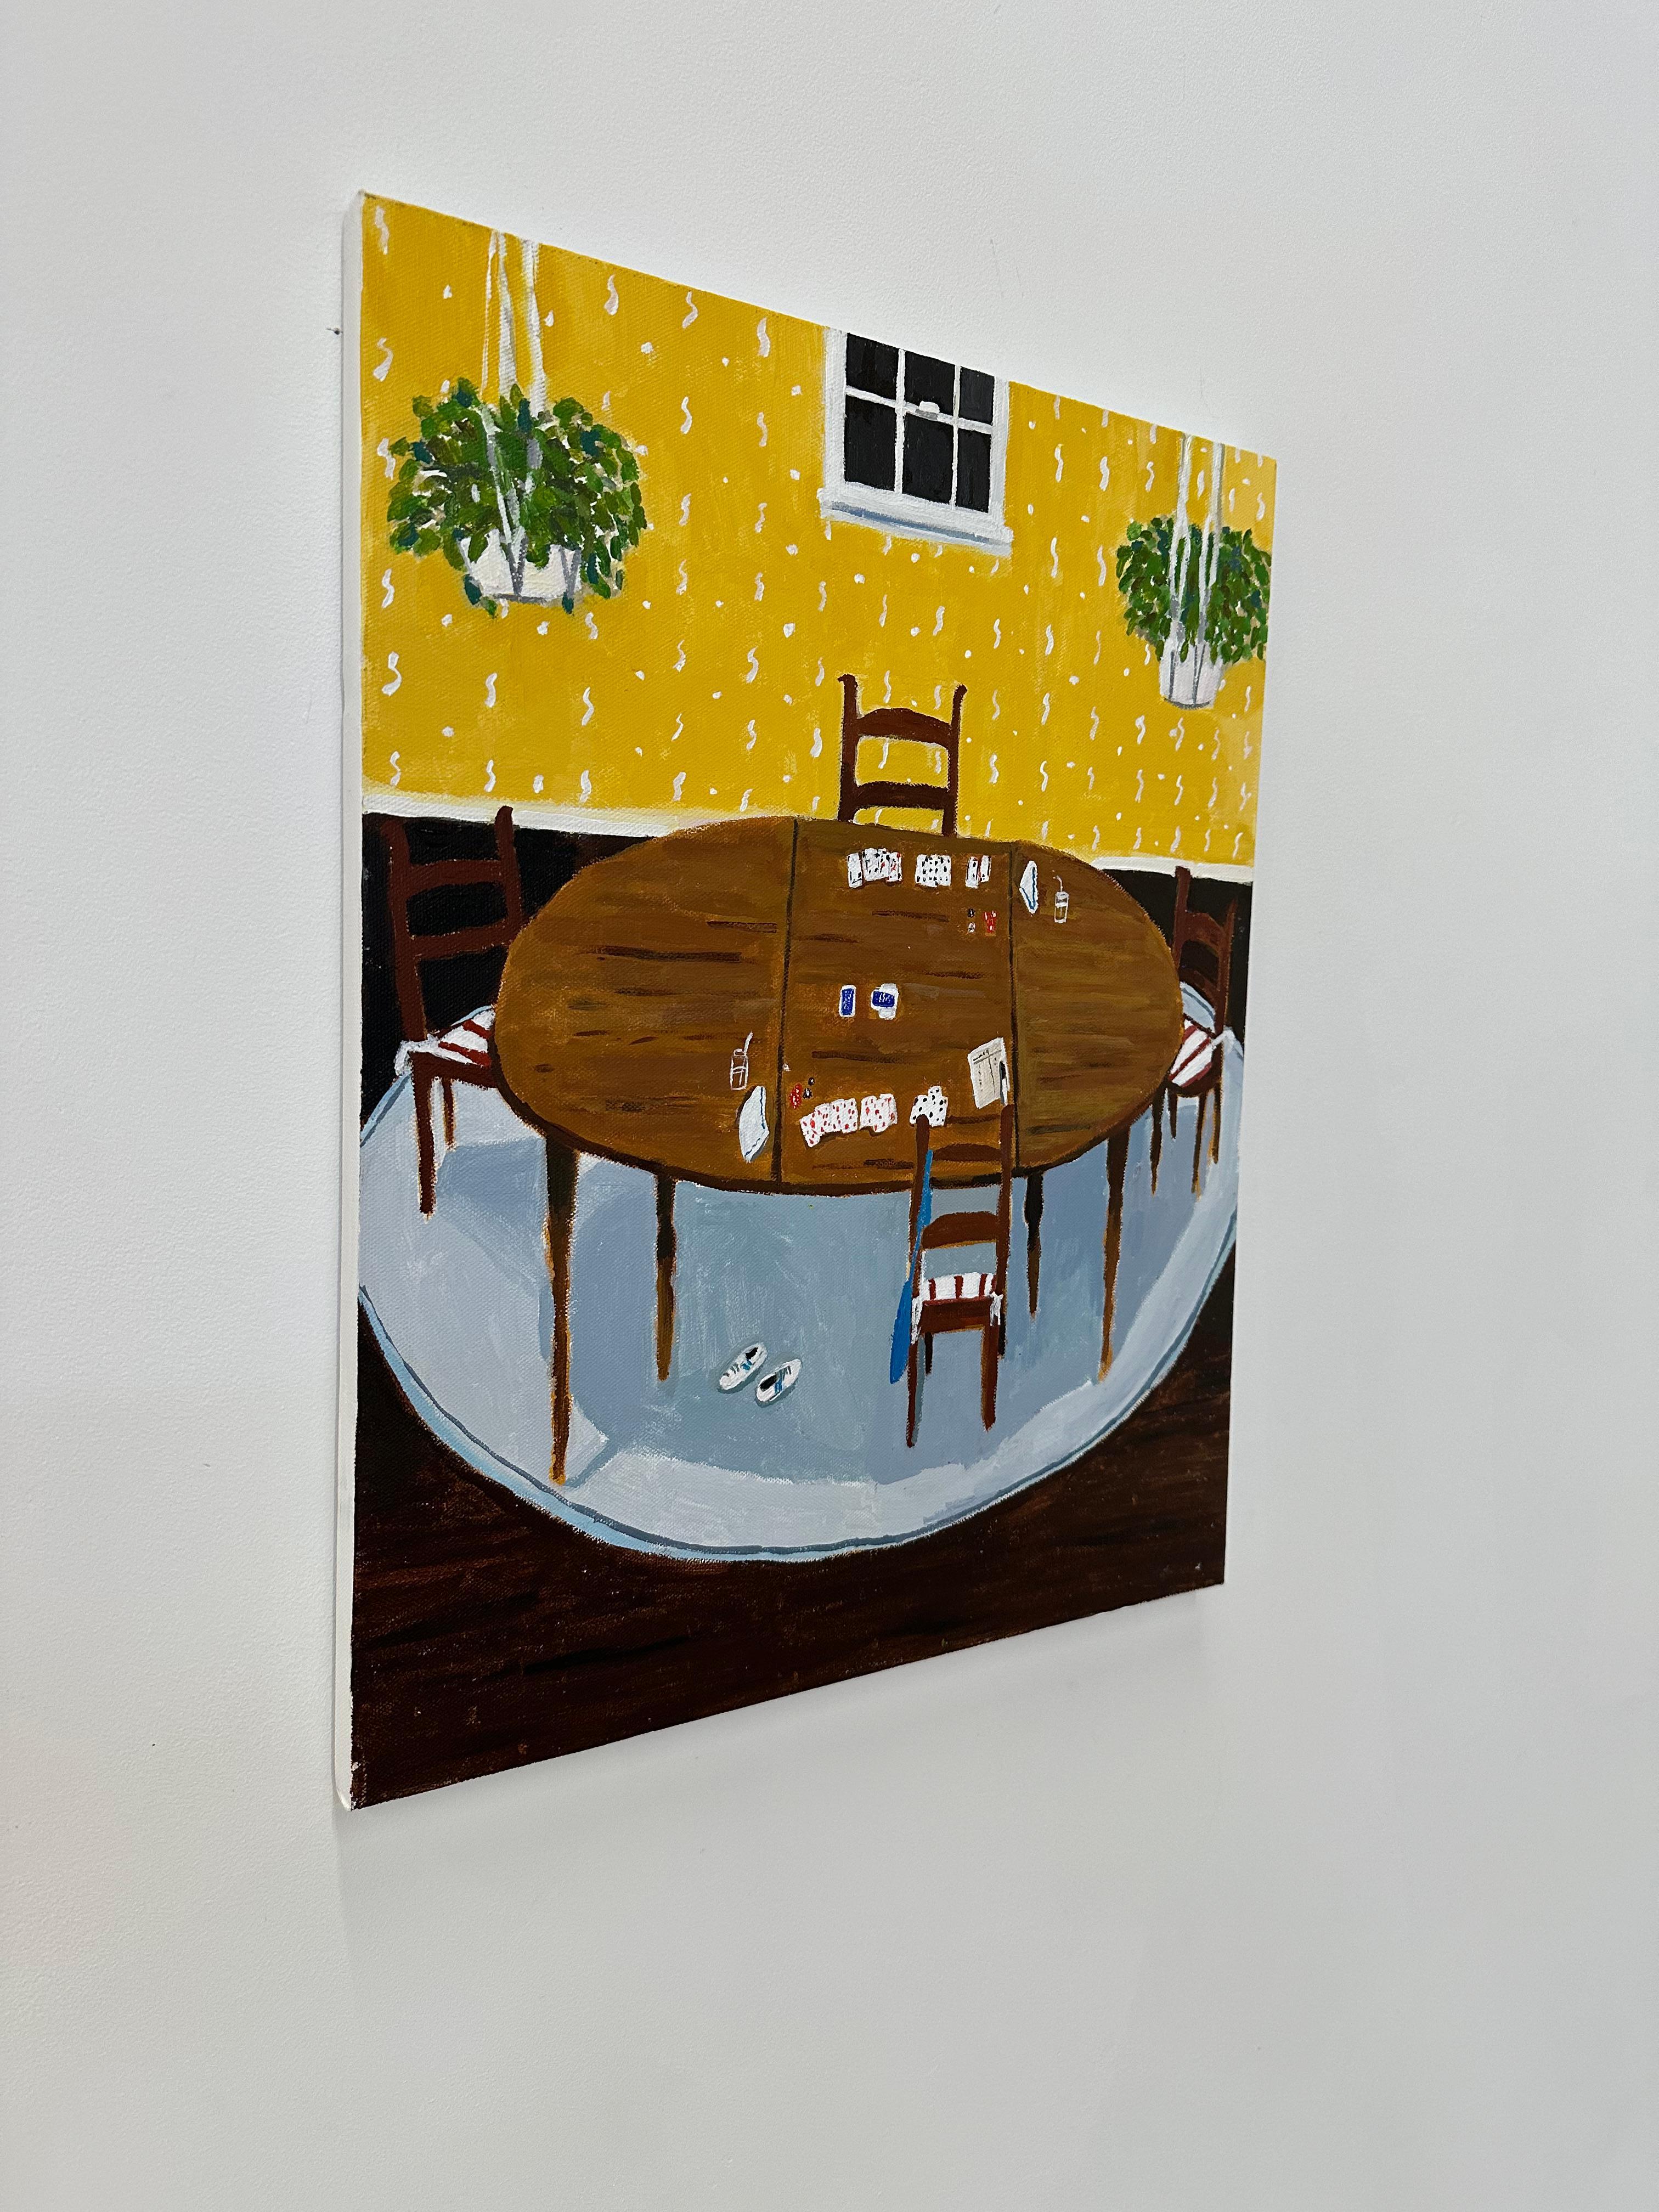 Gin Game in Yellow Room, Dining, Wooden Table, Chairs, Card Game, Green Plants - Contemporary Painting by Polly Shindler